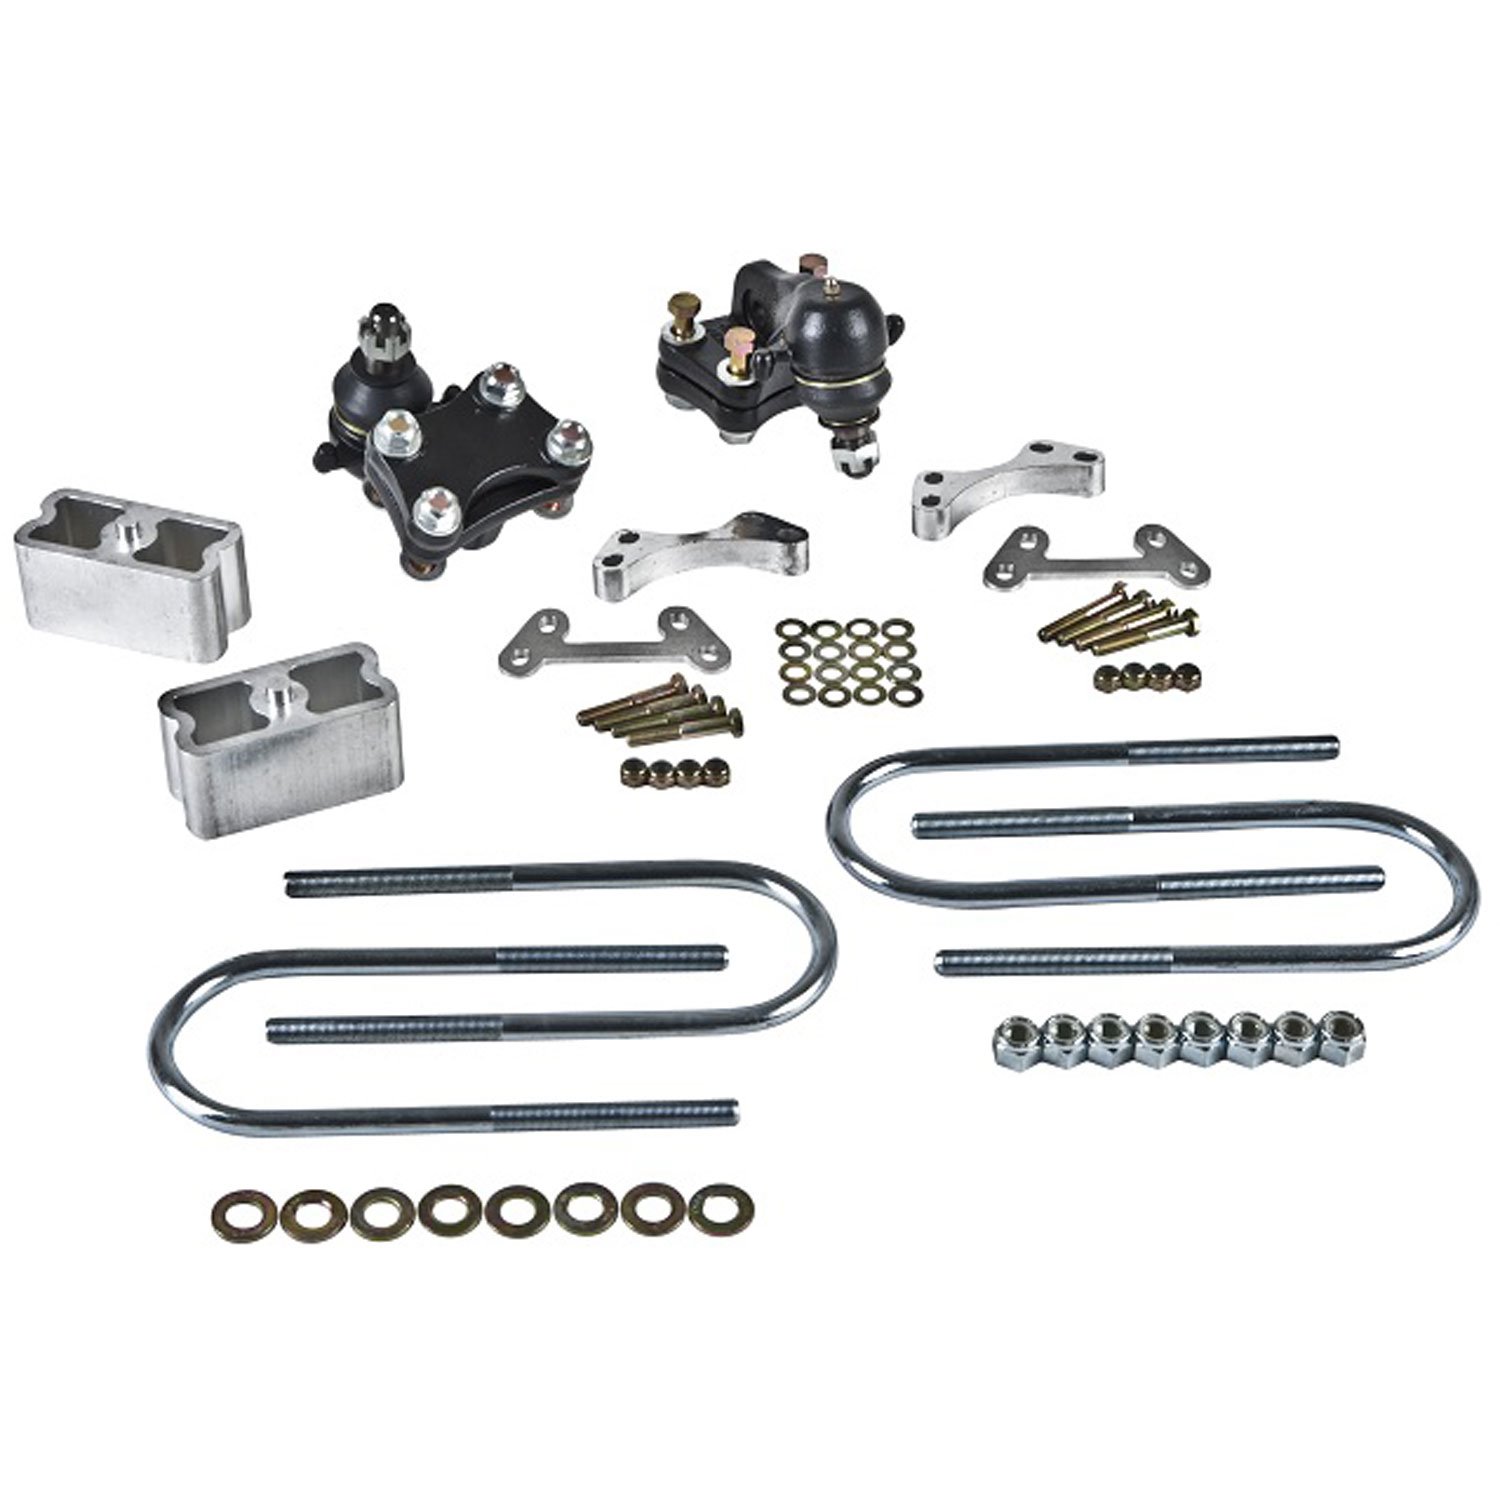 Complete Lowering Kit for 2004-2012 Chevy Colorado/GMC Canyon